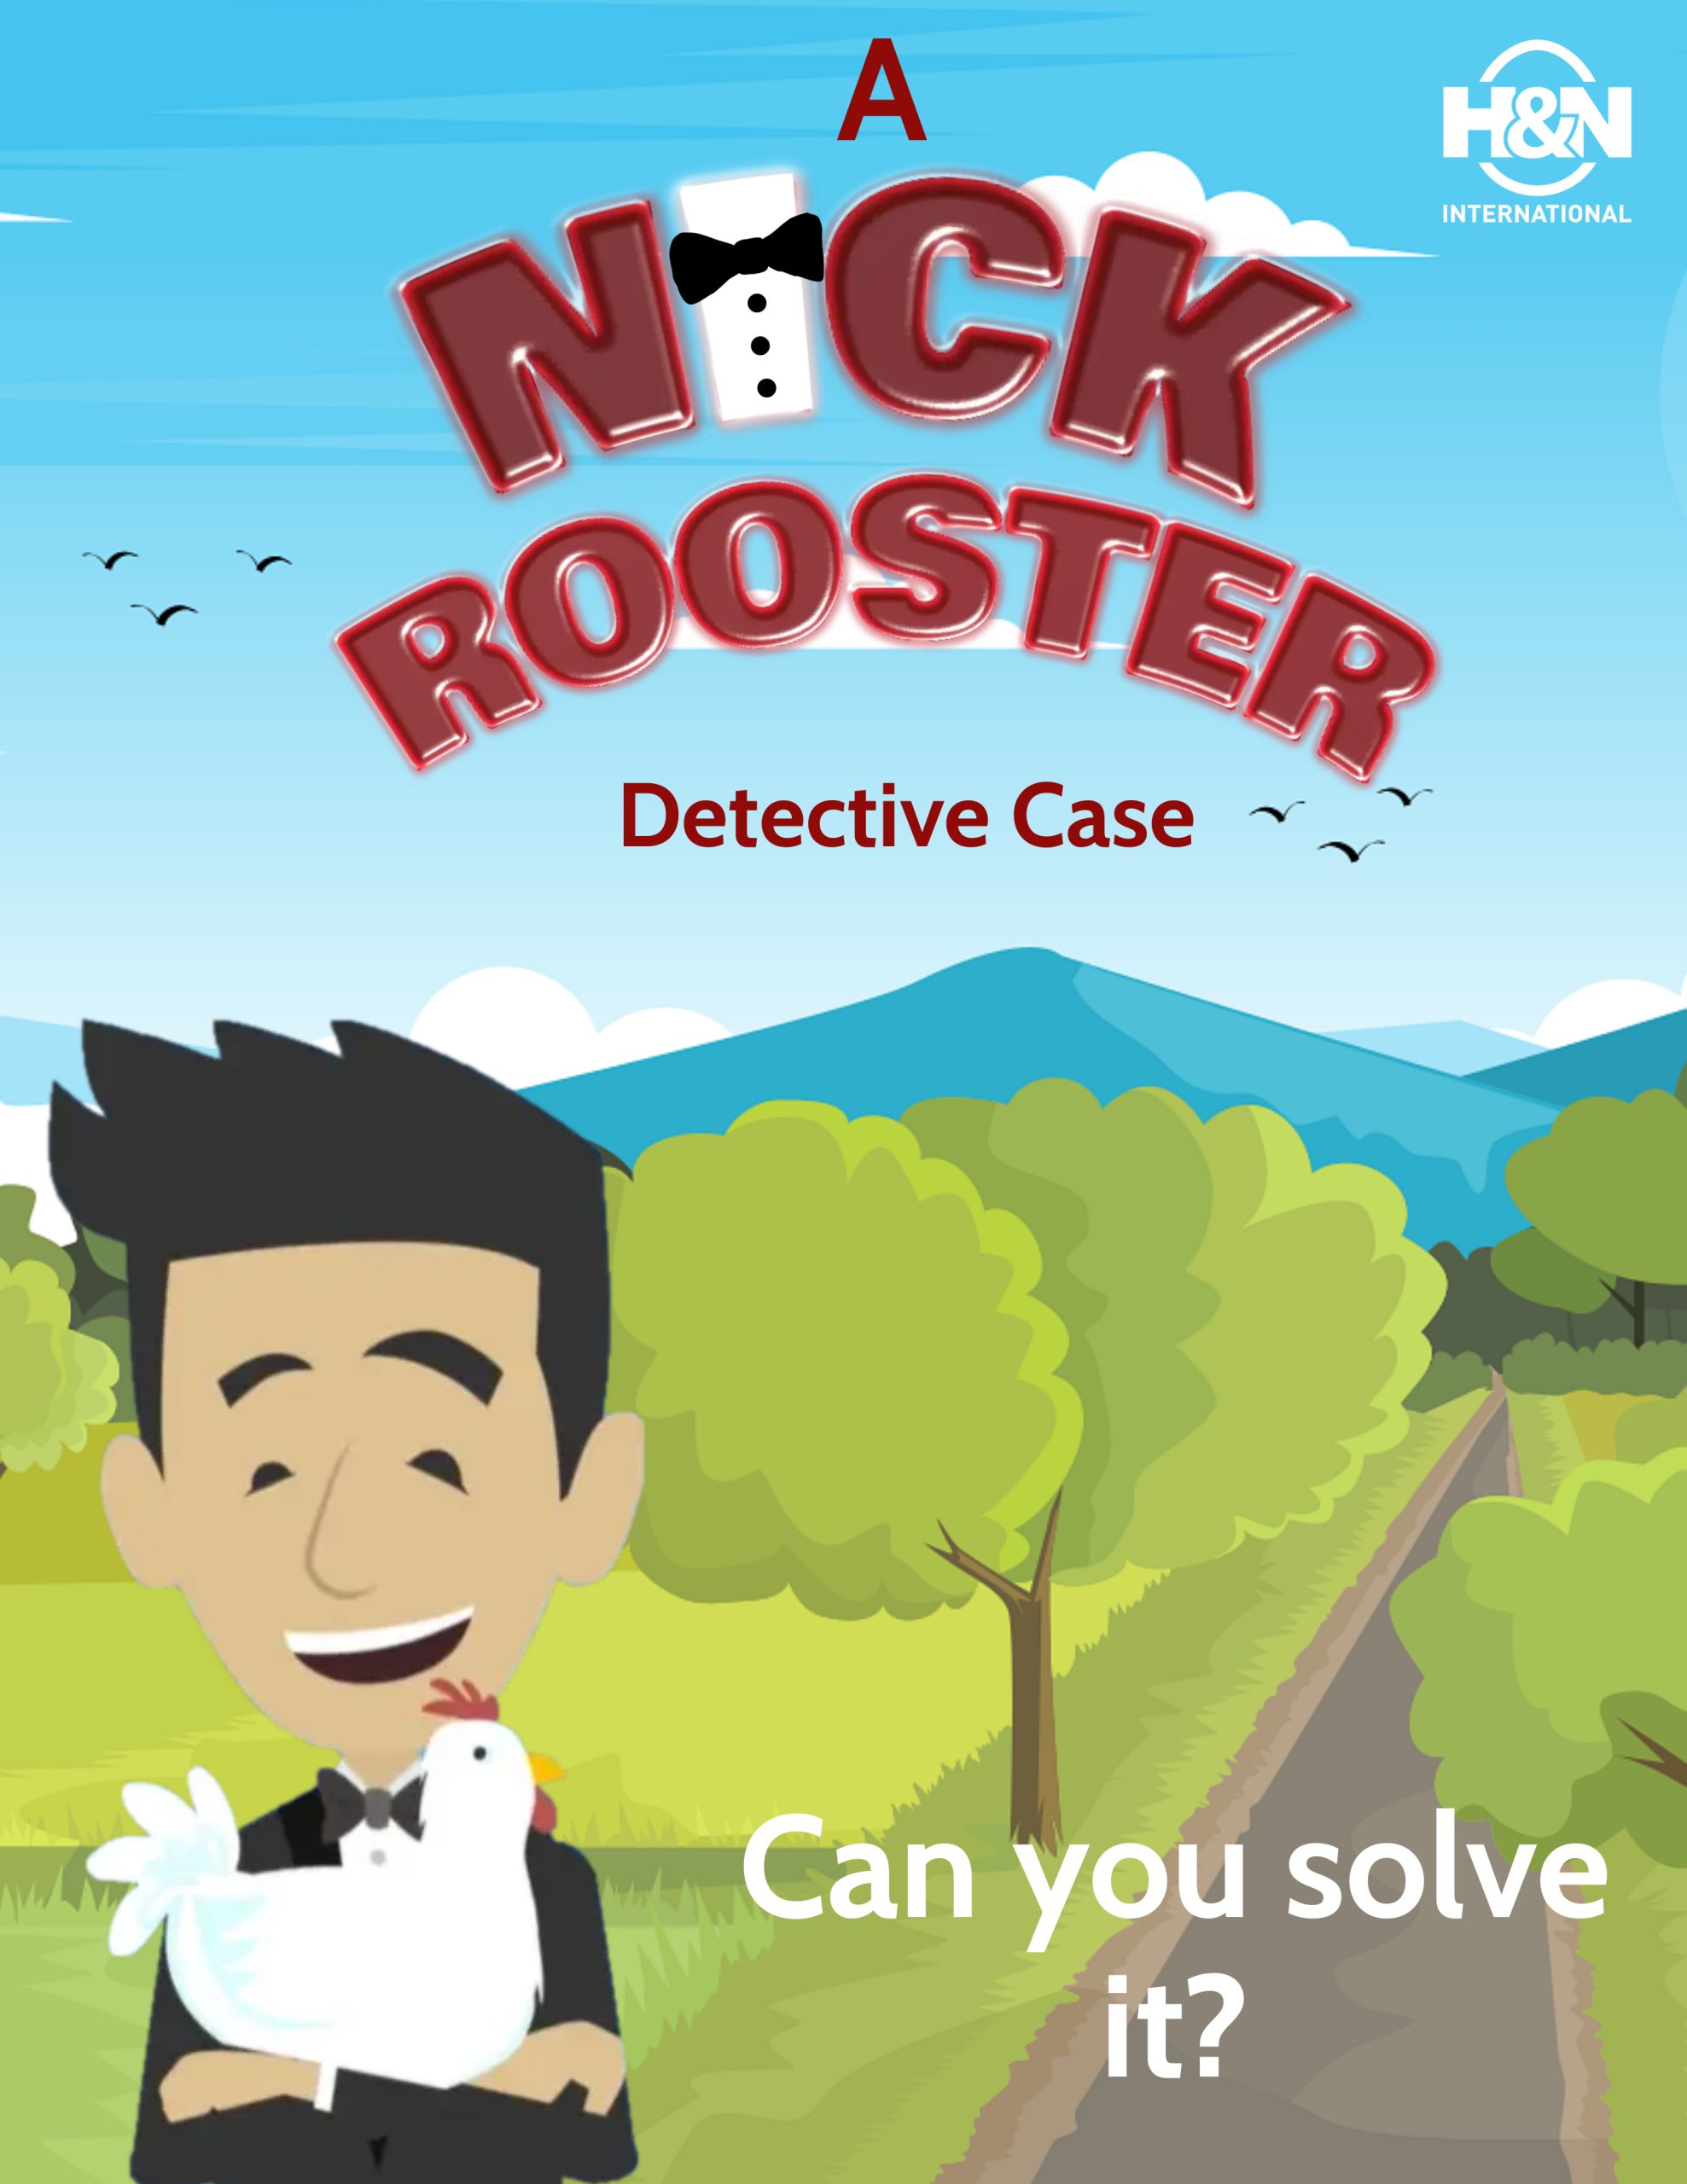 Nick Rooster case no. 11